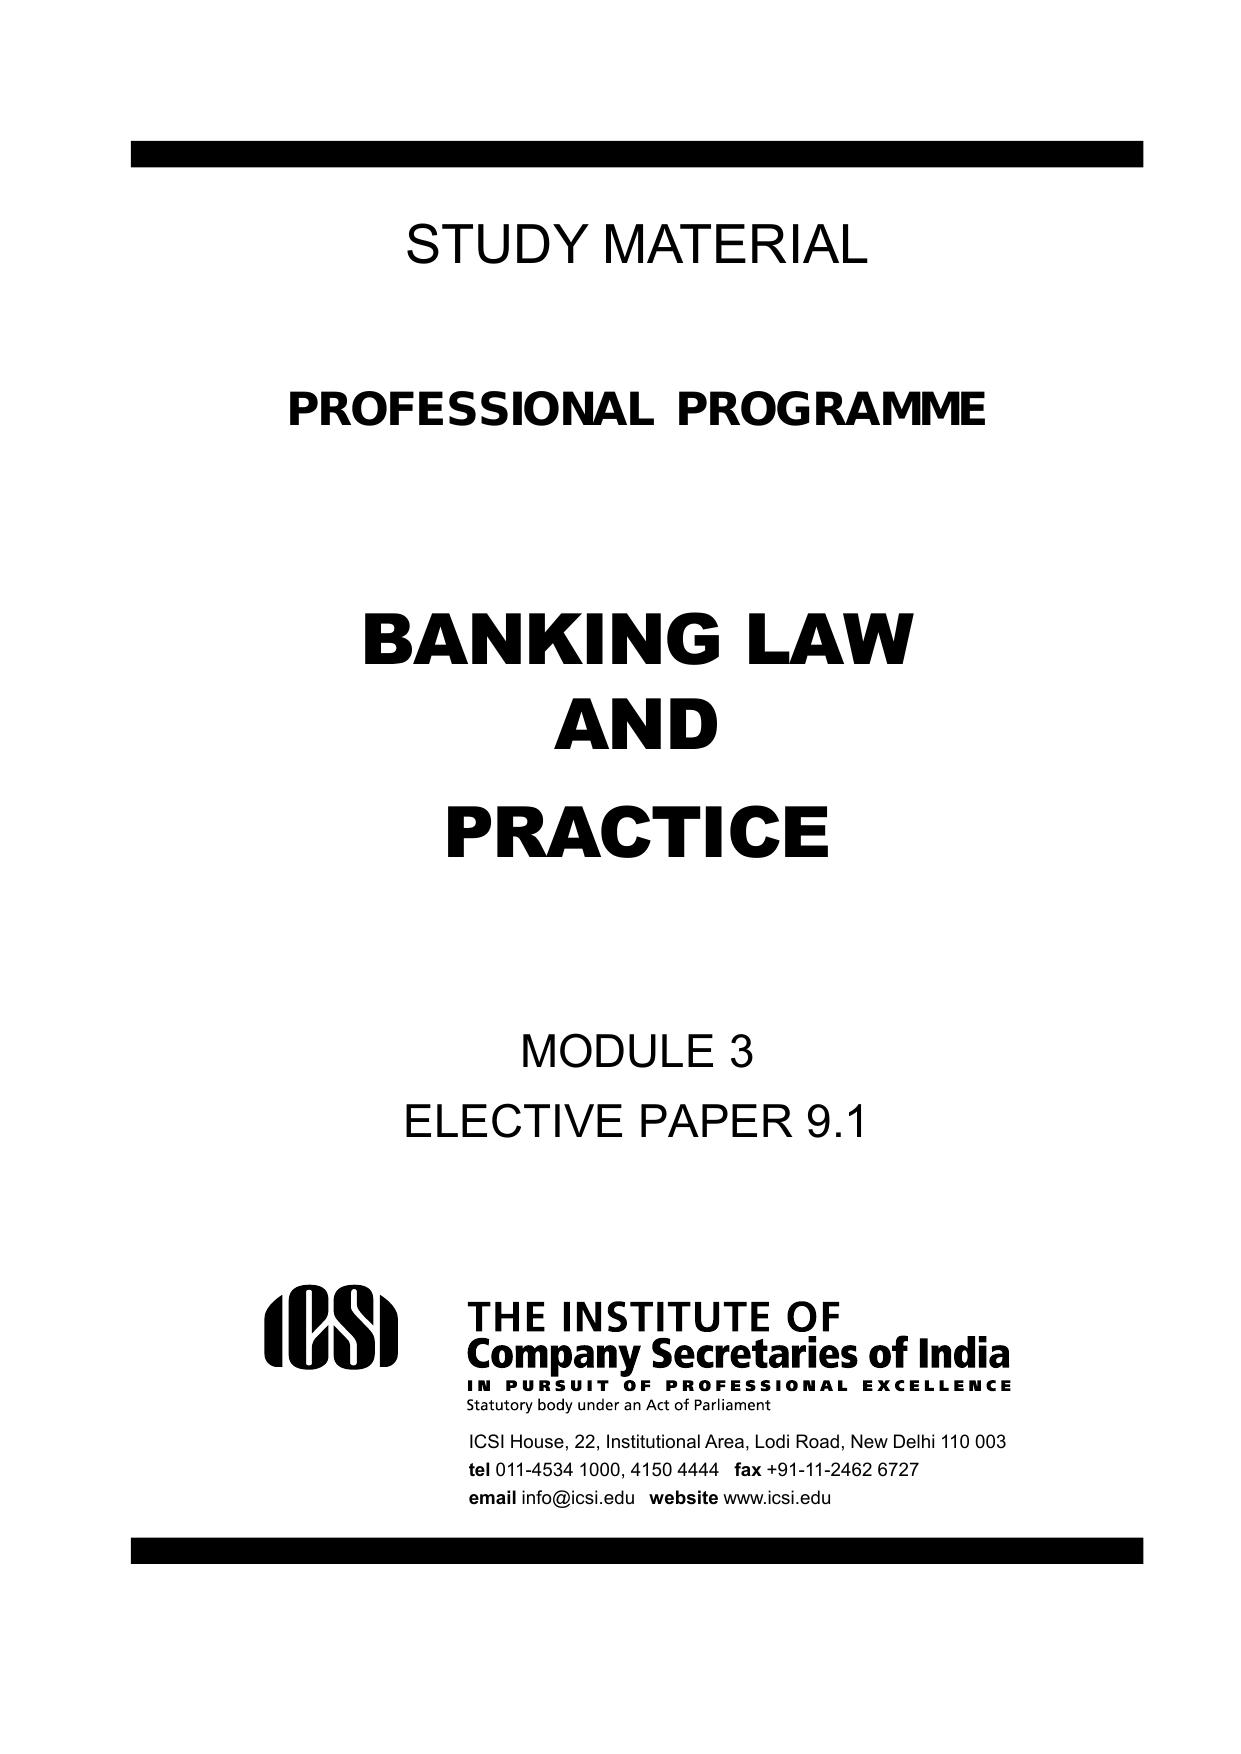 Banking Law and Practice Study Material